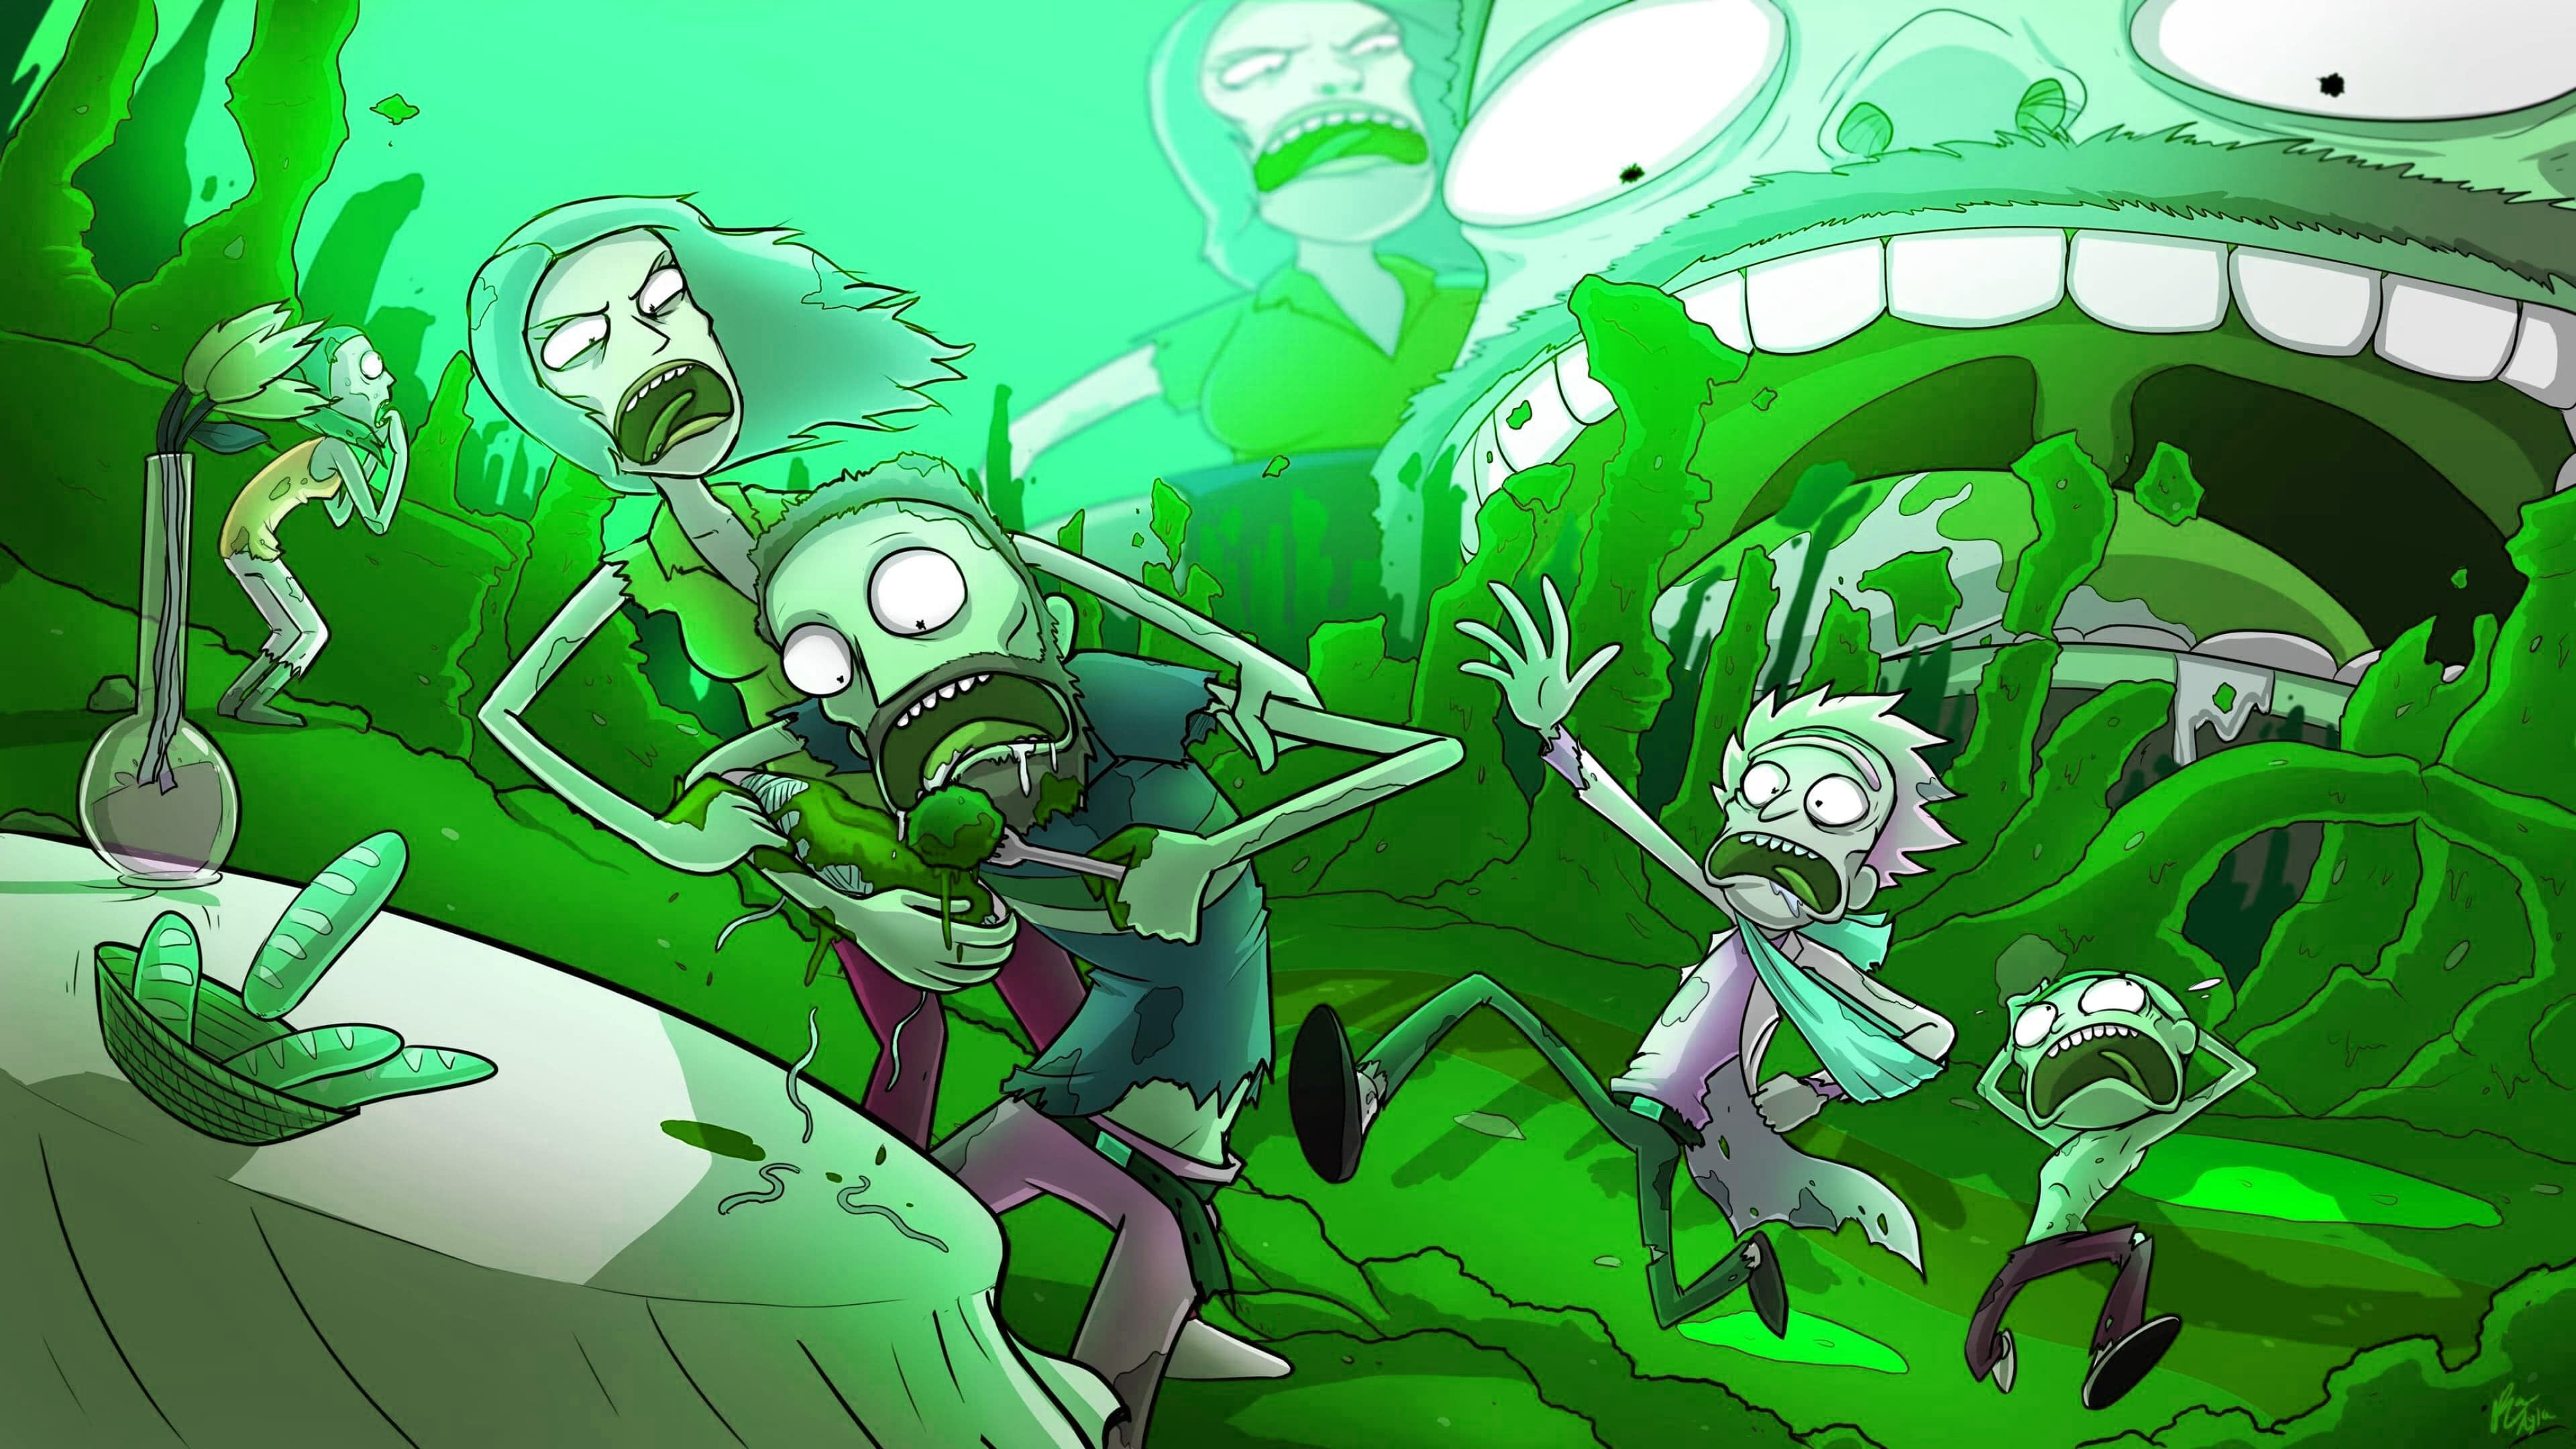 download rick and morty season 1 free legally